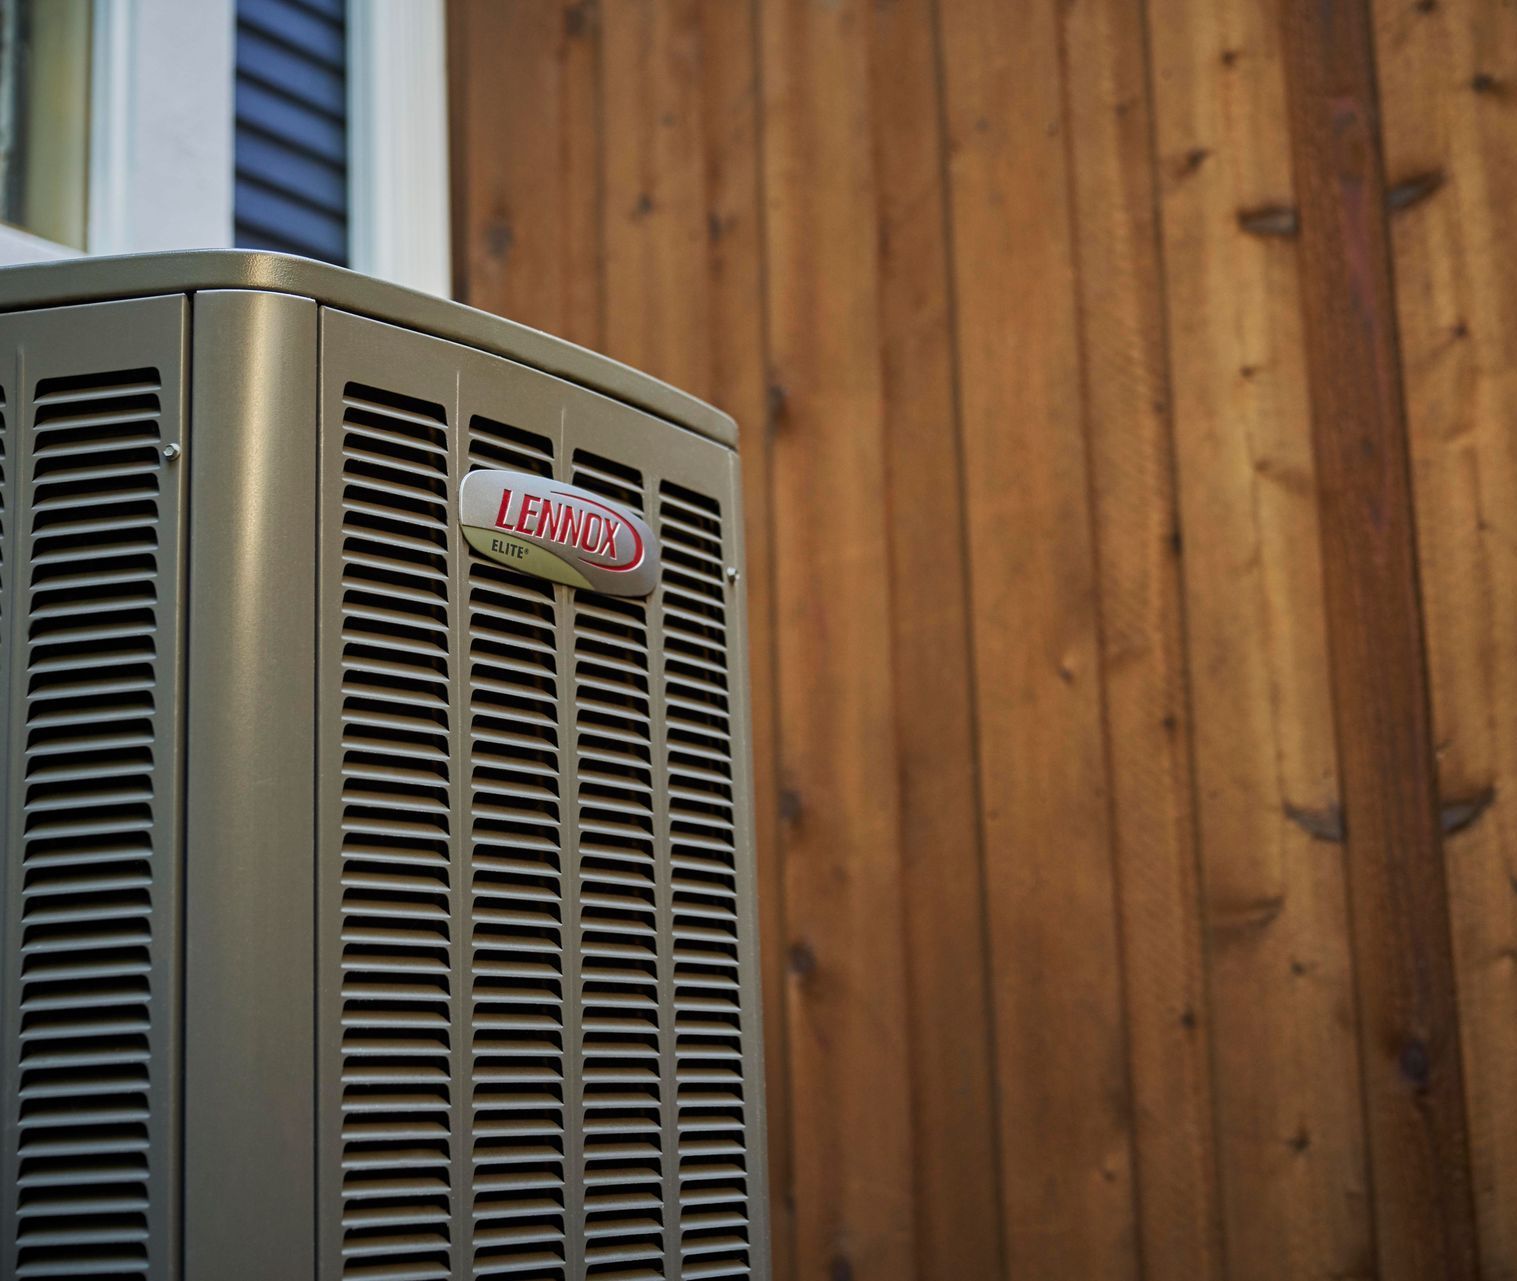 Lennox air conditioning unit outside.